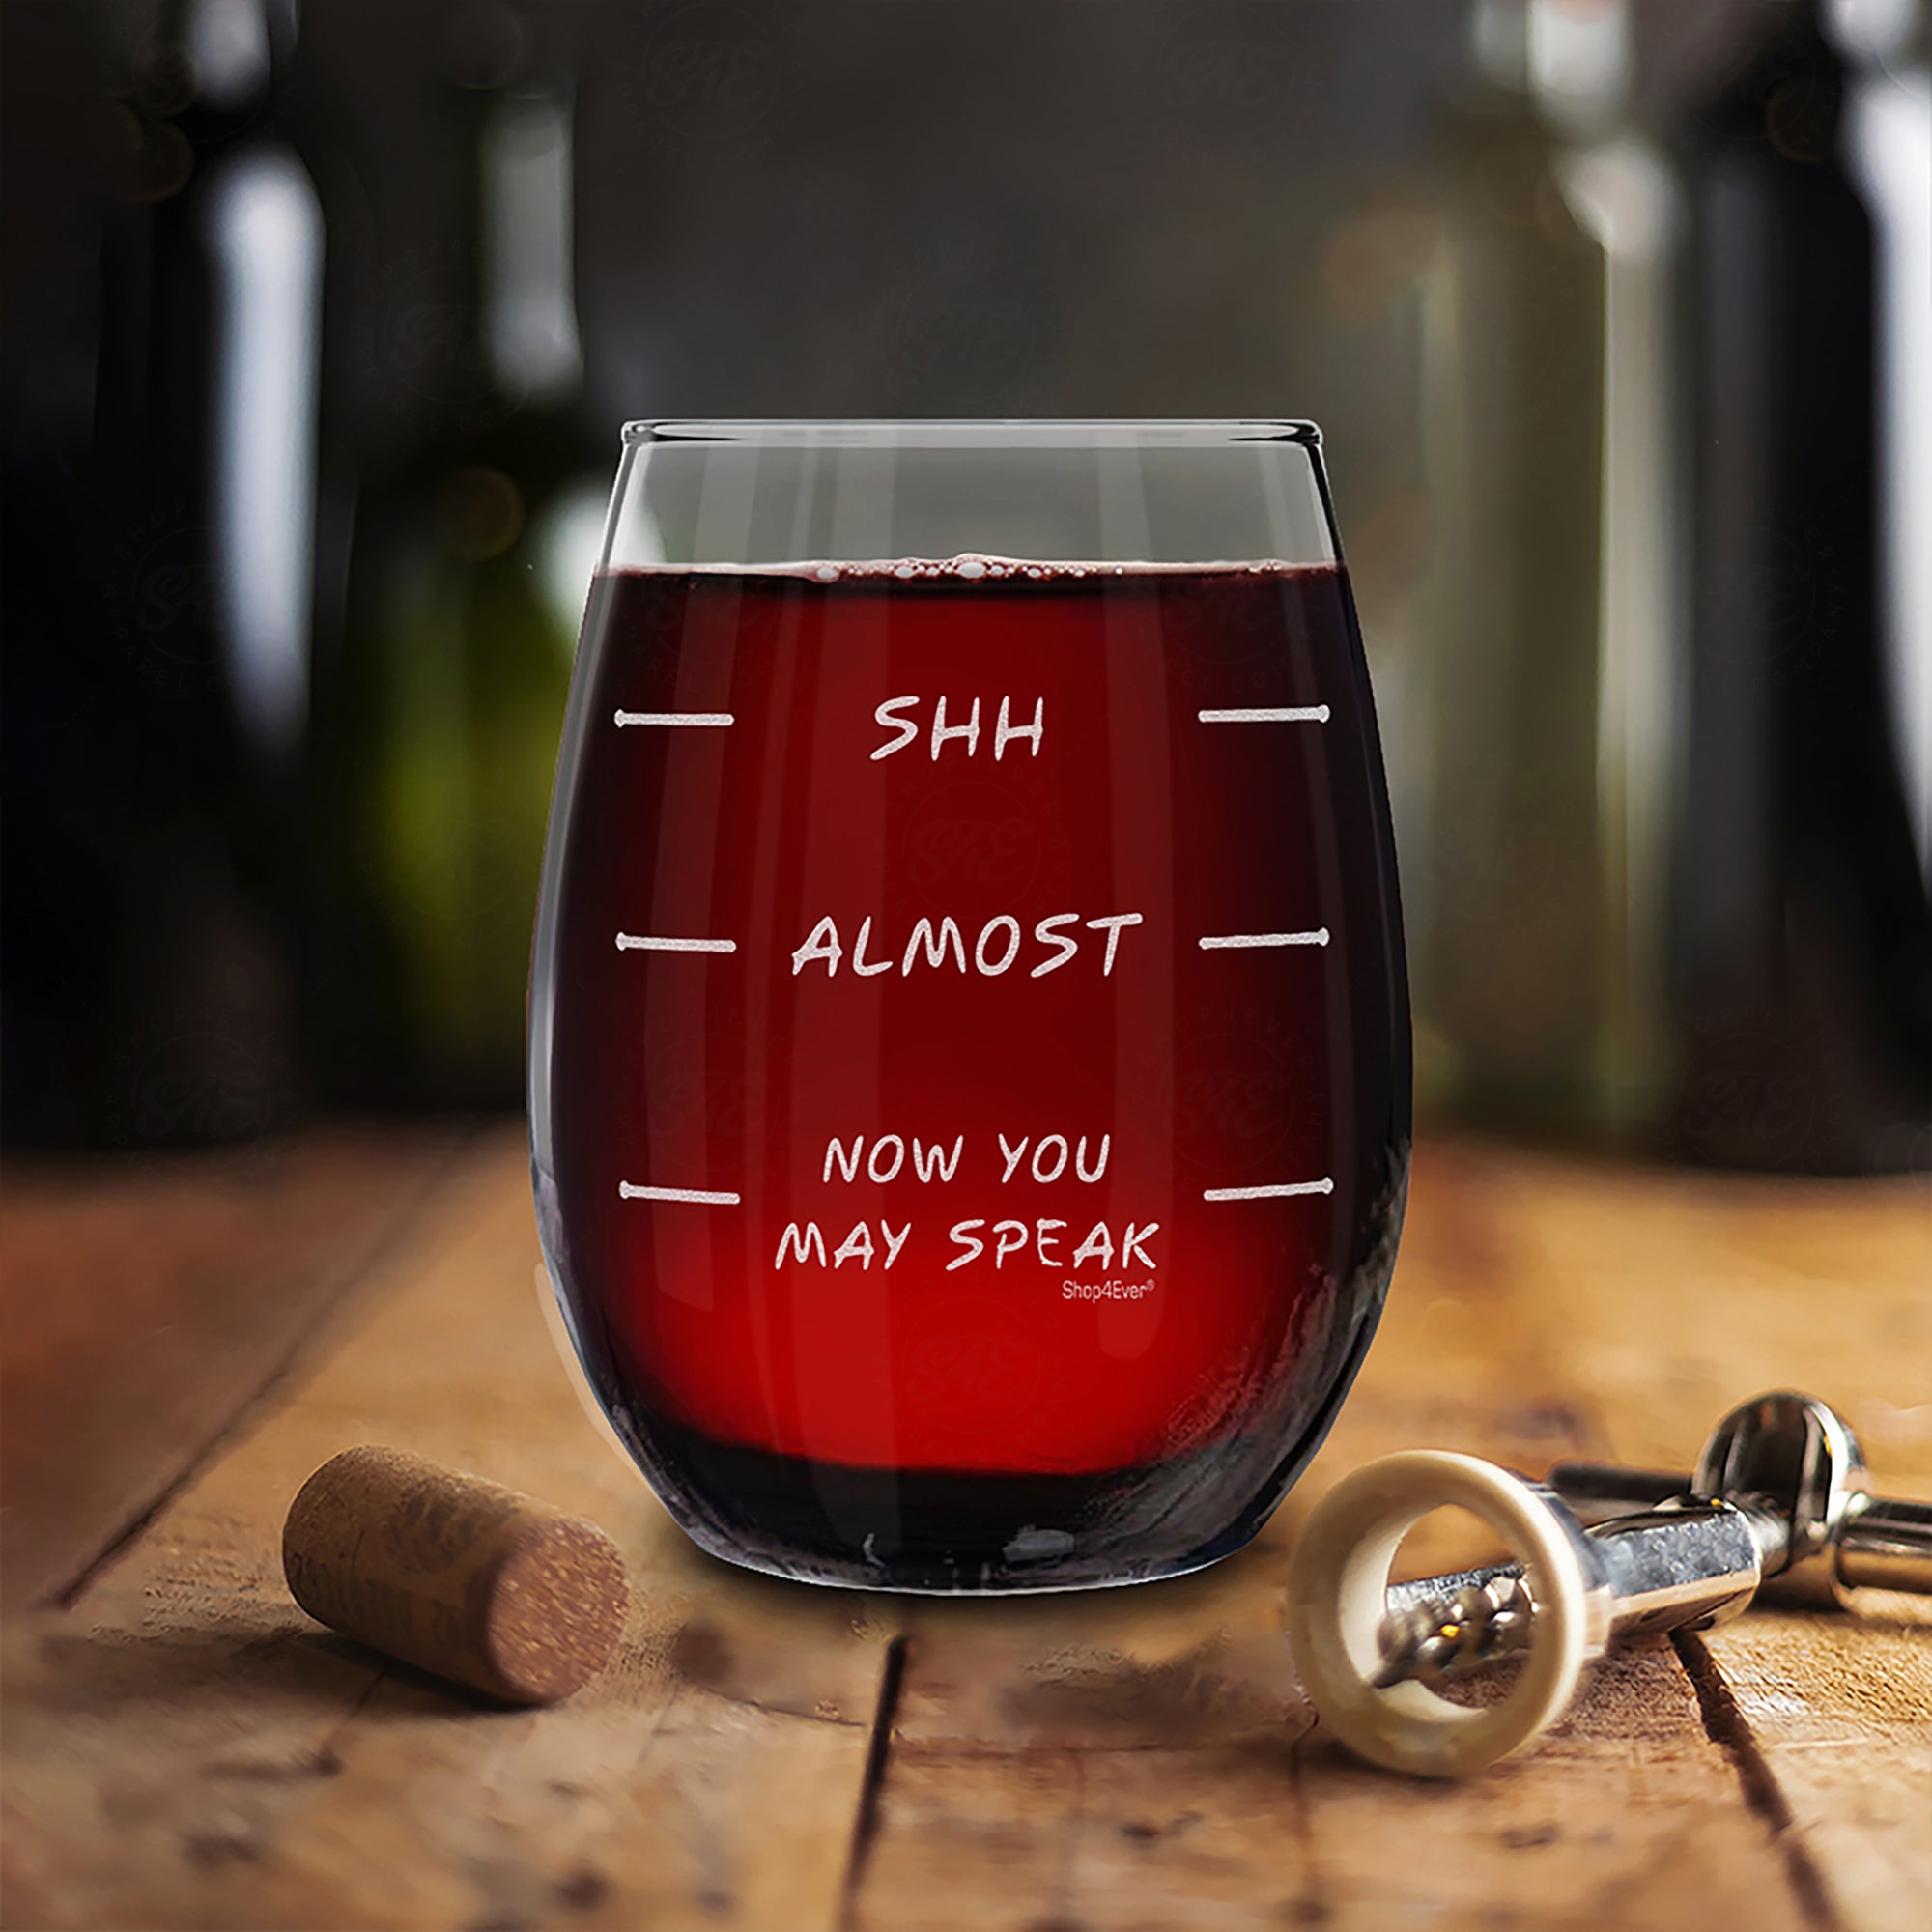 Shh - Almost - Now You May Speak Laser Engraved Stemless Wine Glass Funny Drinking Wine Glass for Mom Sister Bestfriend Coworker